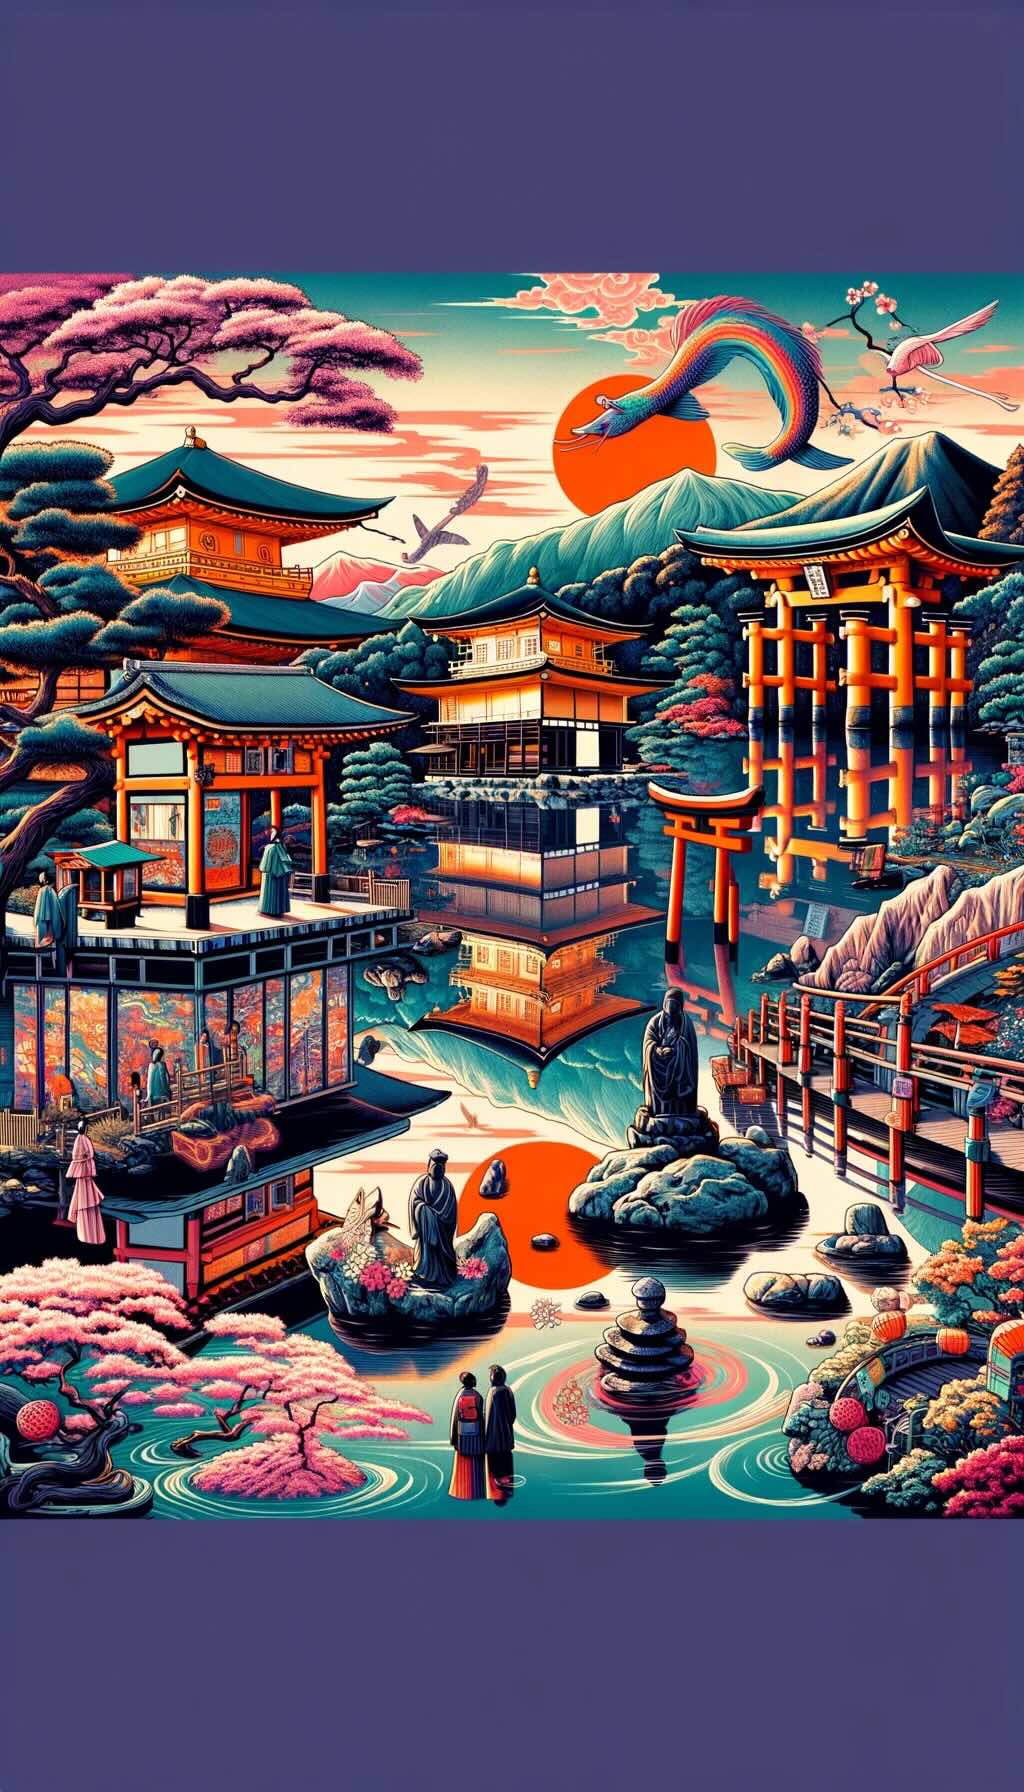 Spiritual and historical journey through Kyoto. This illustration reflects on the experiences at various temples, shrines, and cultural landmarks in the city